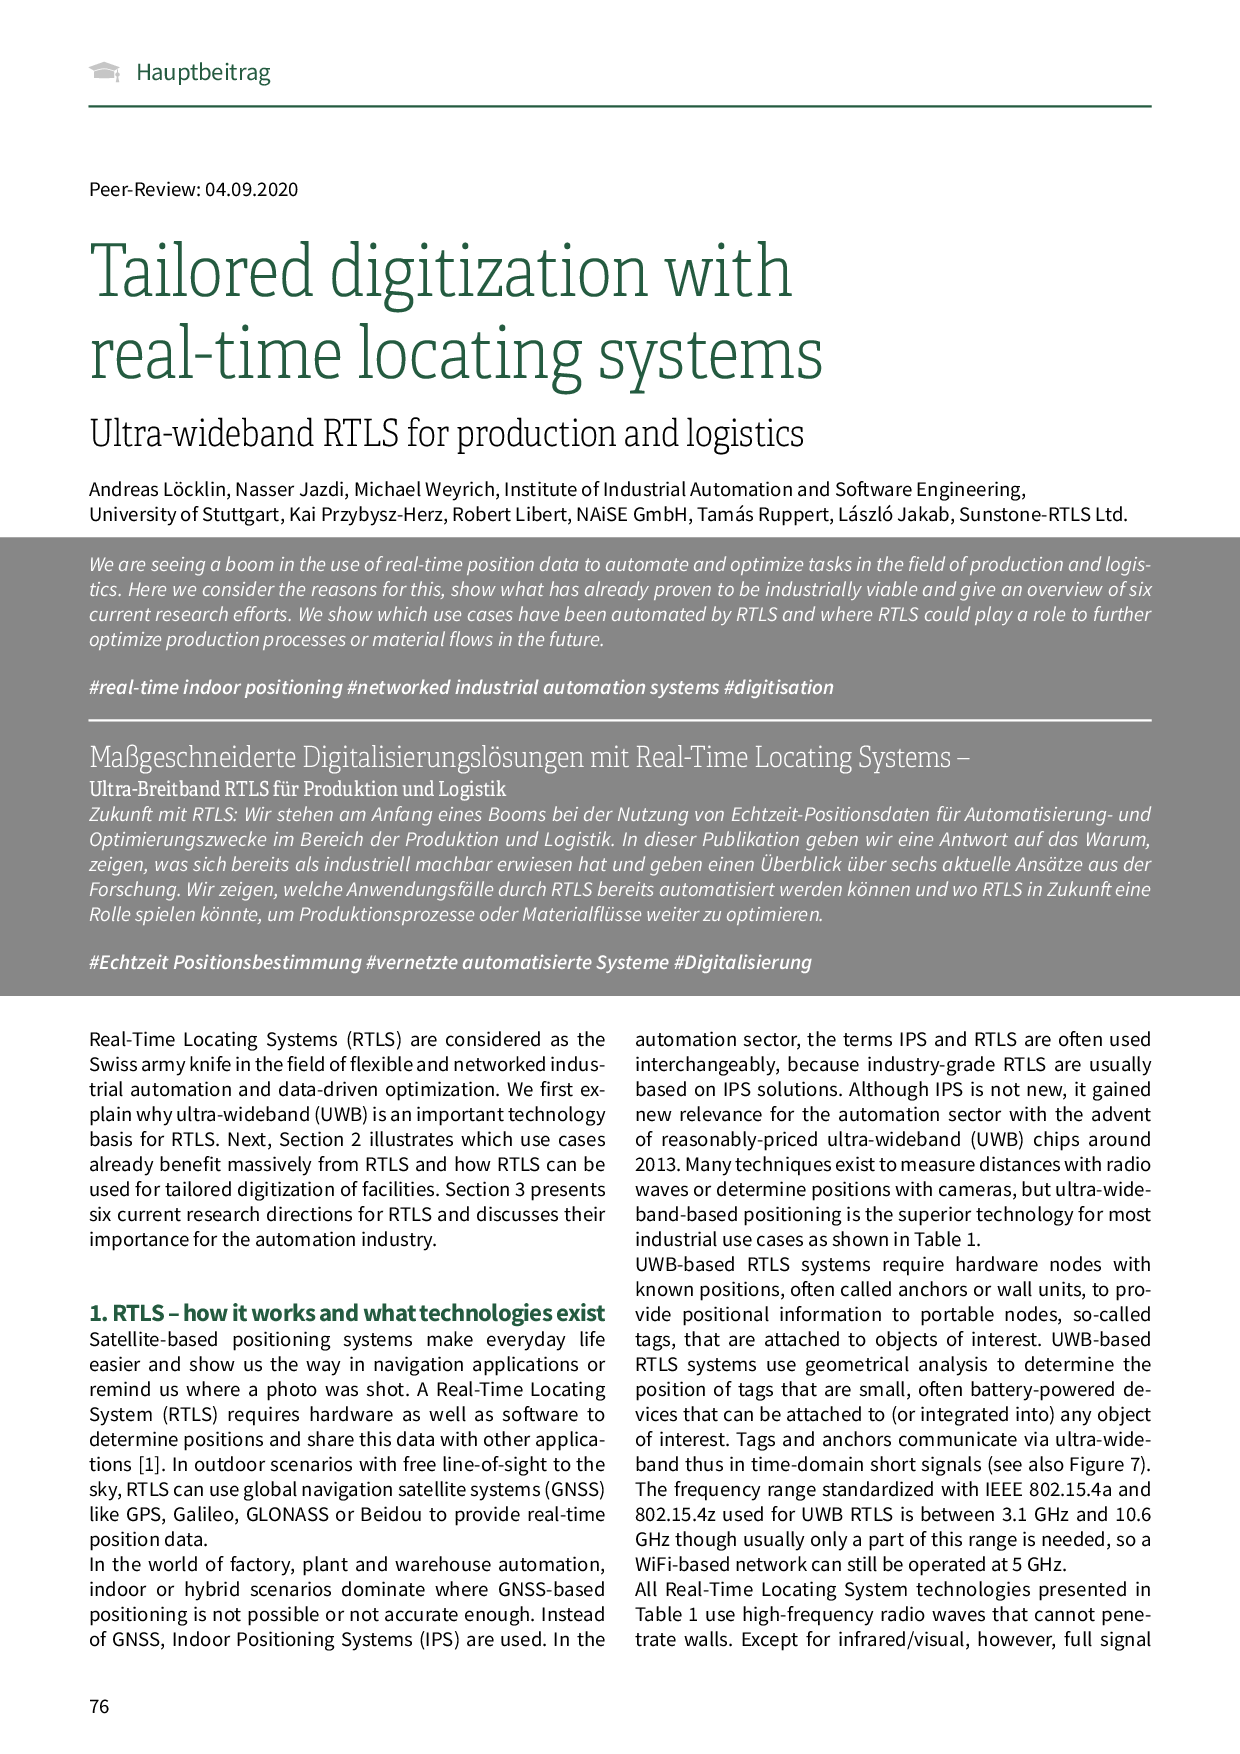 Tailored digitization with real-time locating systems